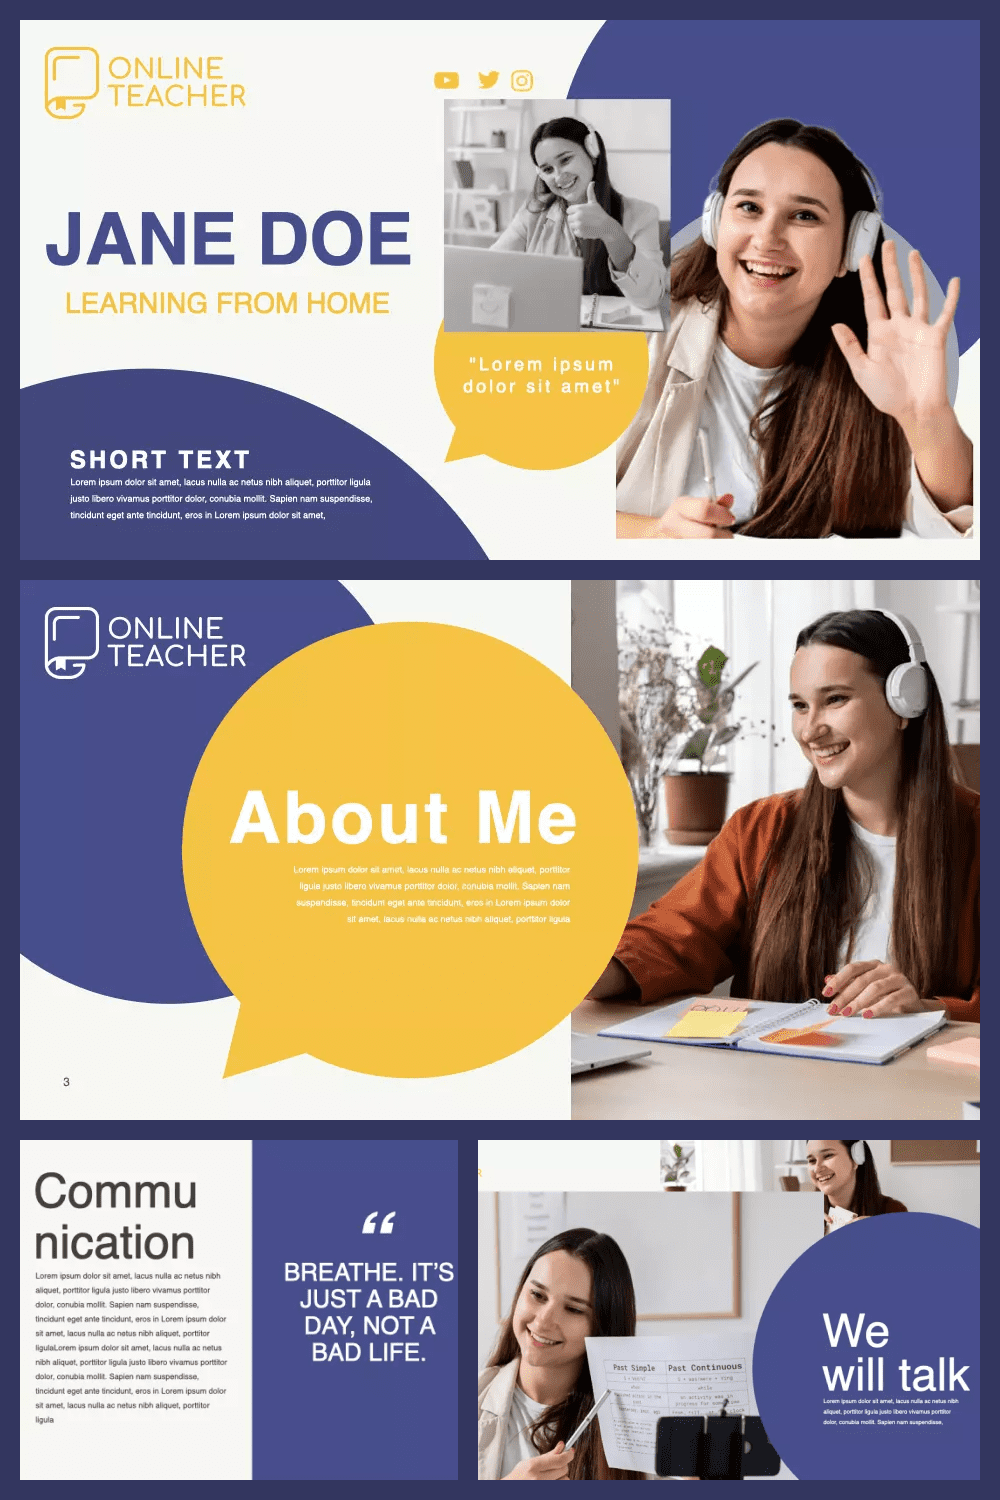 Screenshots of template pages with blue and white backgrounds, student photos, and yellow accents.